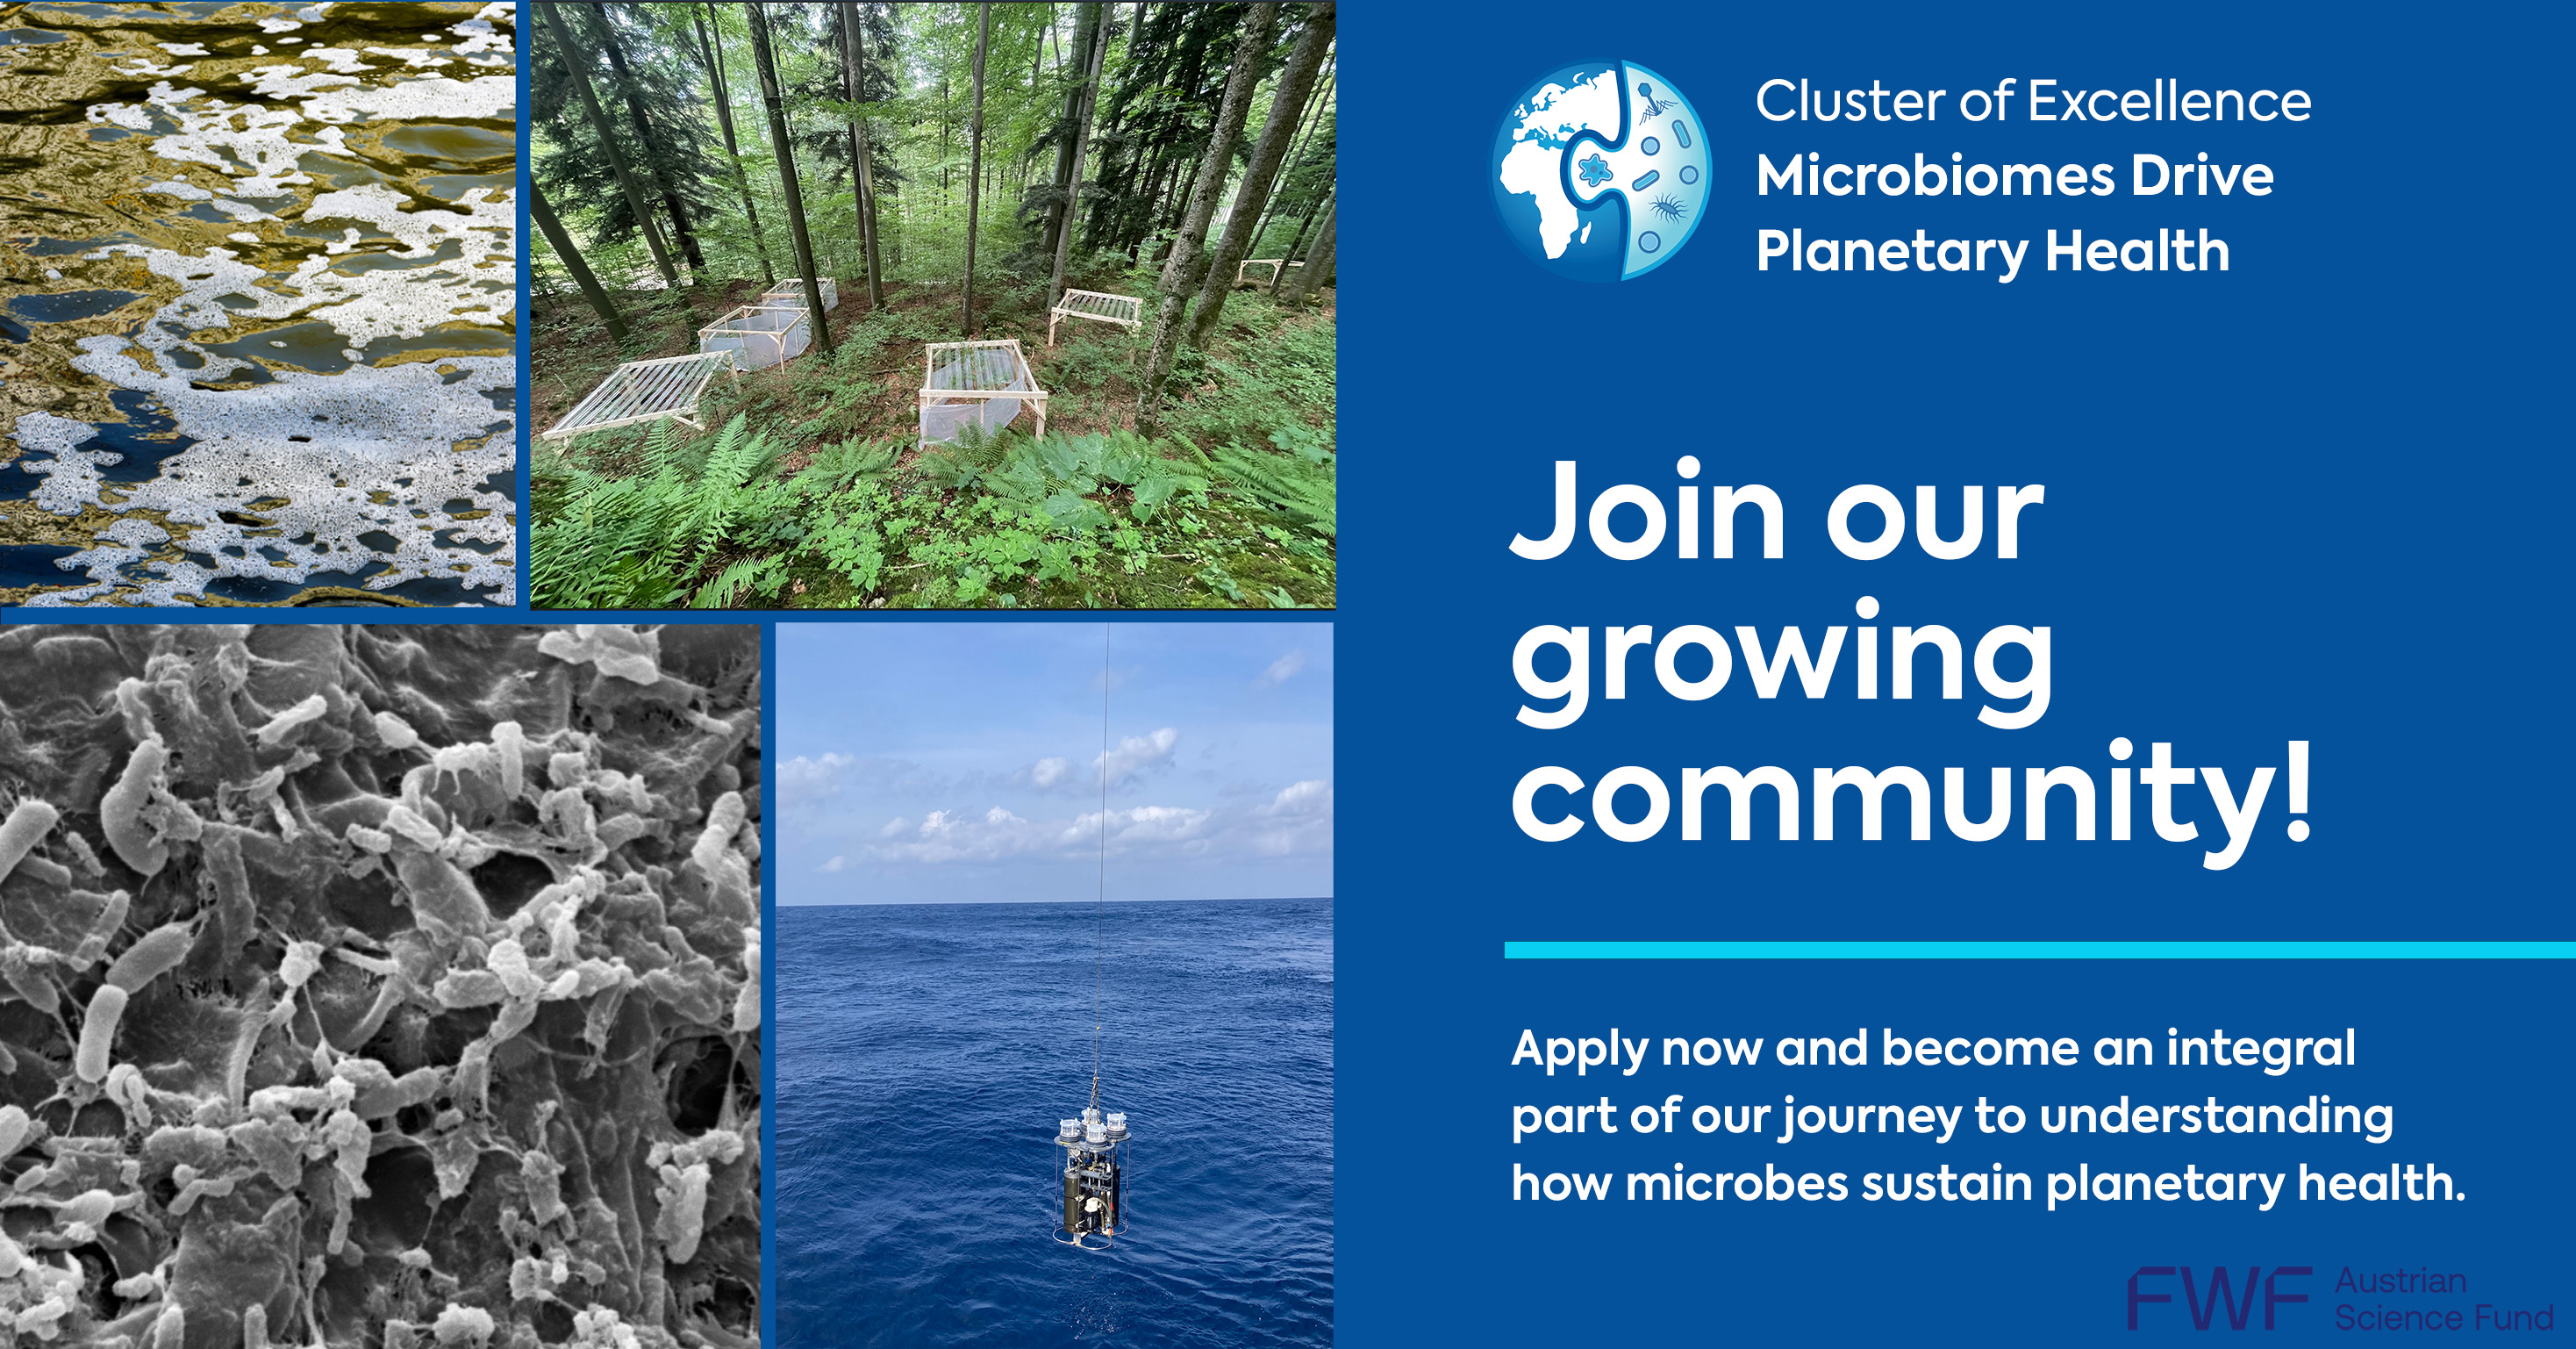 Banner outlining the recruitment call including the logo of the Cluster of Excellence, and images of microbes and habitats